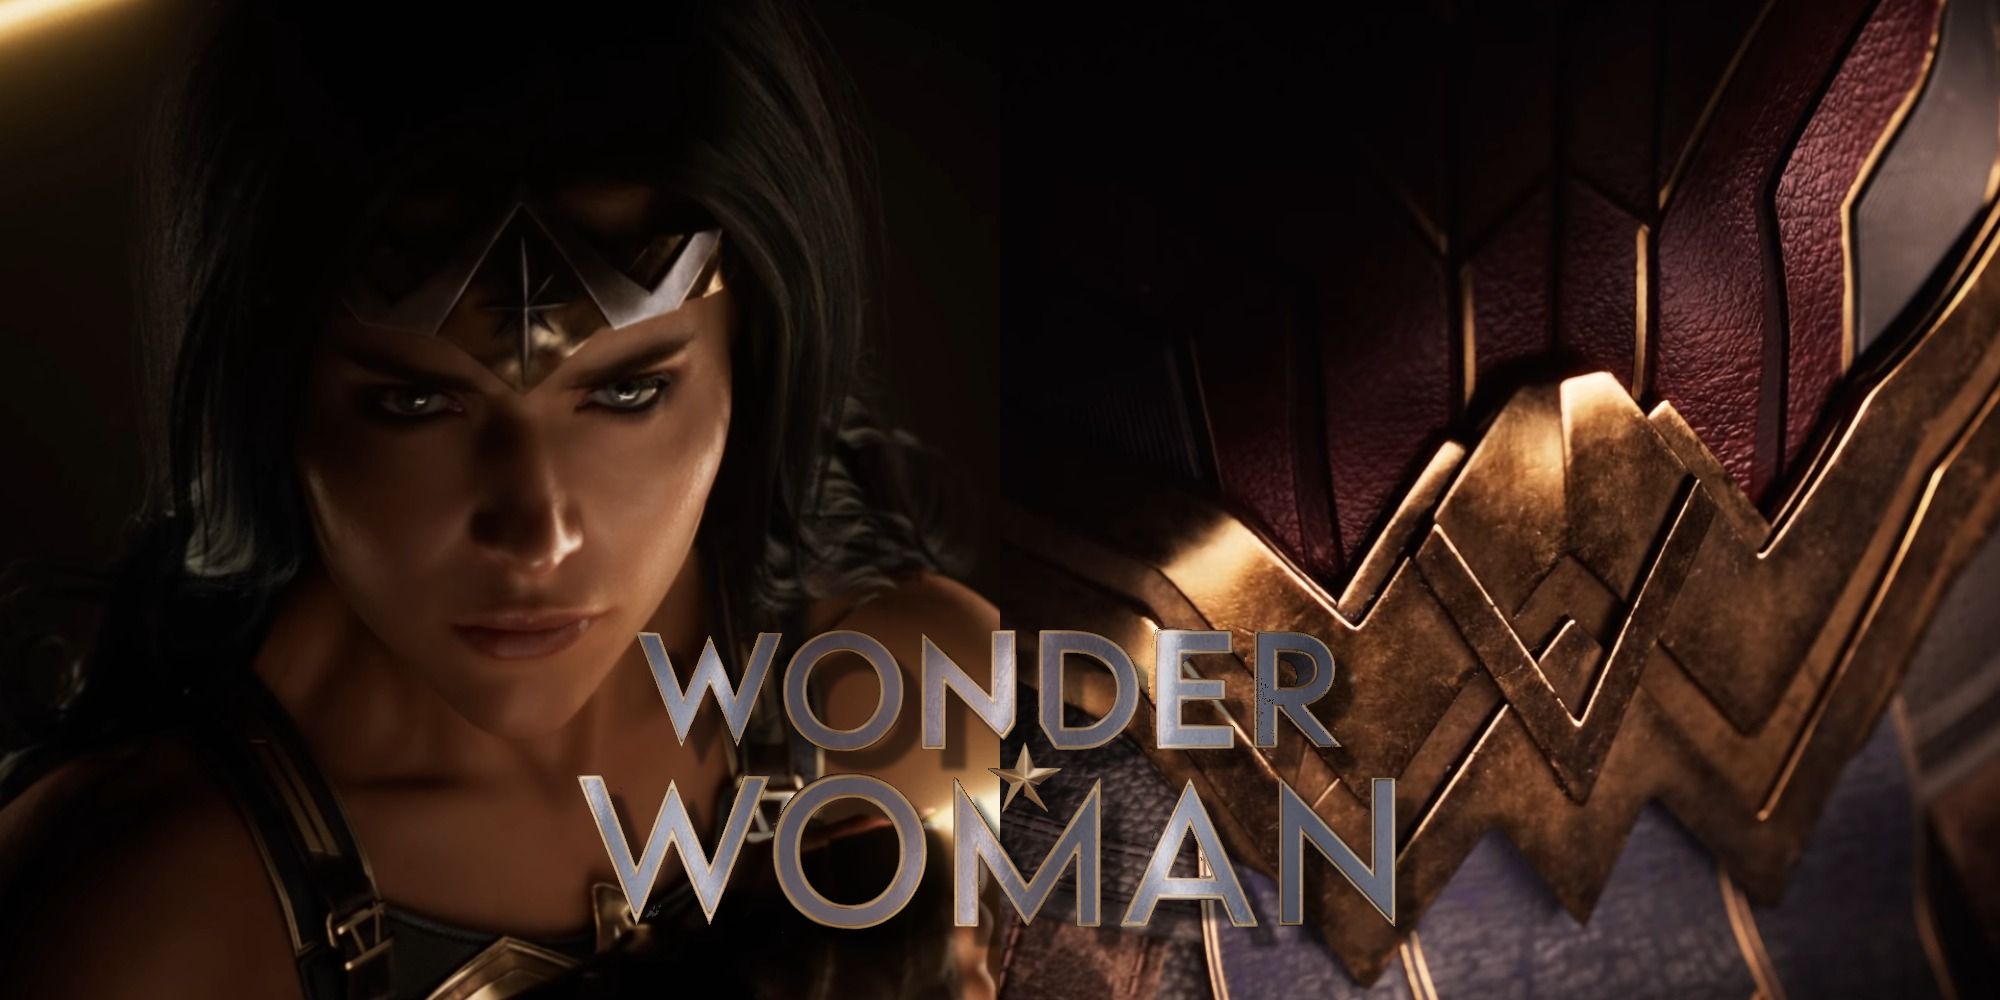 IGN - A new Wonder Woman game was teased tonight at The Game